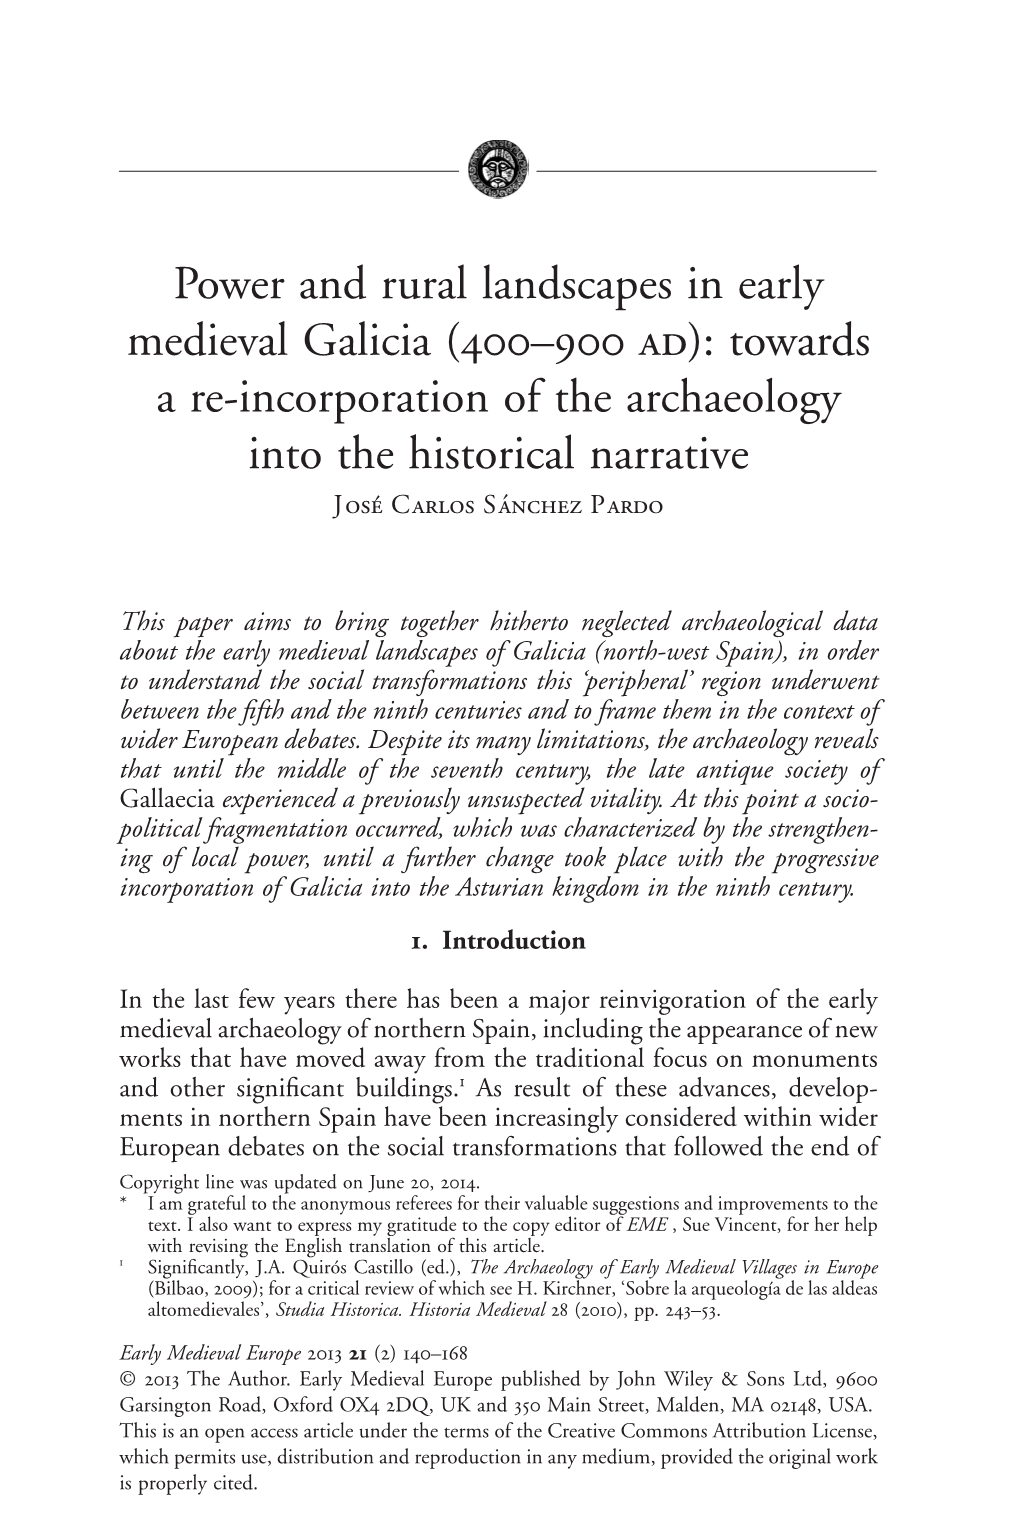 Power and Rural Landscapes in Early Medieval Galicia